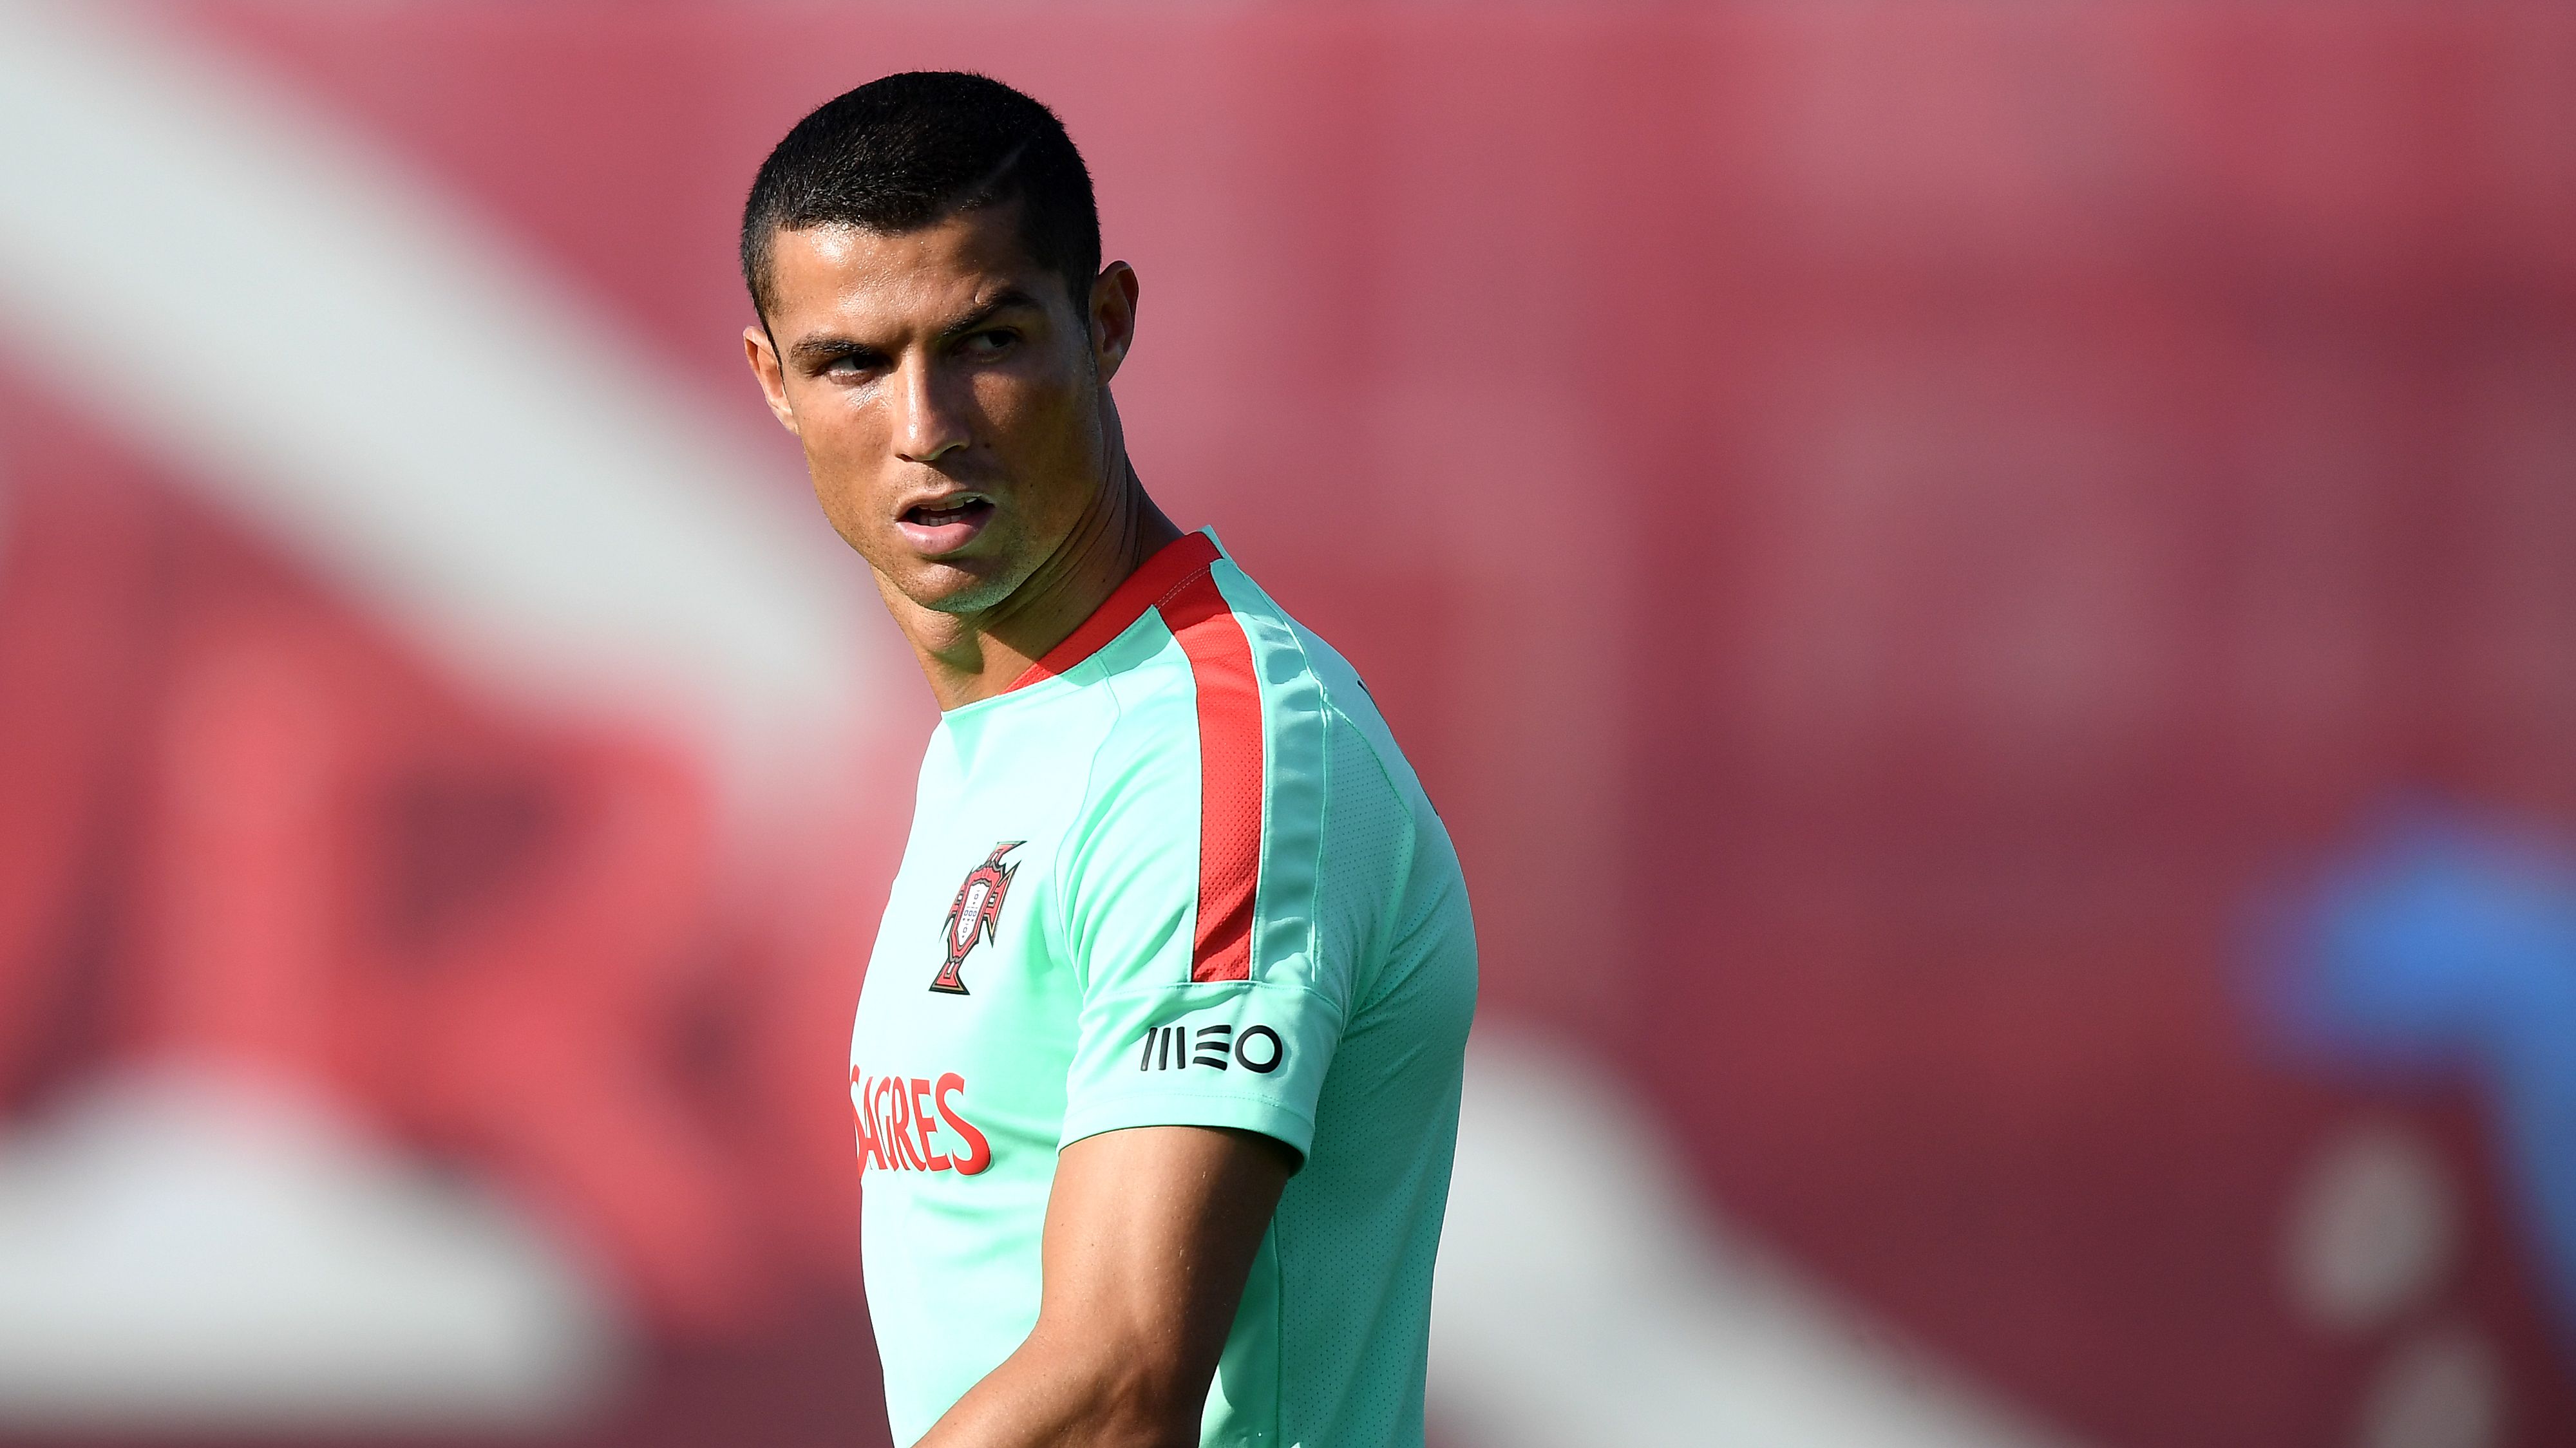 Portugal's forward Cristiano Ronaldo attends a training session ahead of the Russia 2017 Confederation Cup football tournament in Kazan, Russia on June 16, 2017. / AFP PHOTO / FRANCK FIFE        (Photo credit should read FRANCK FIFE/AFP/Getty Images)